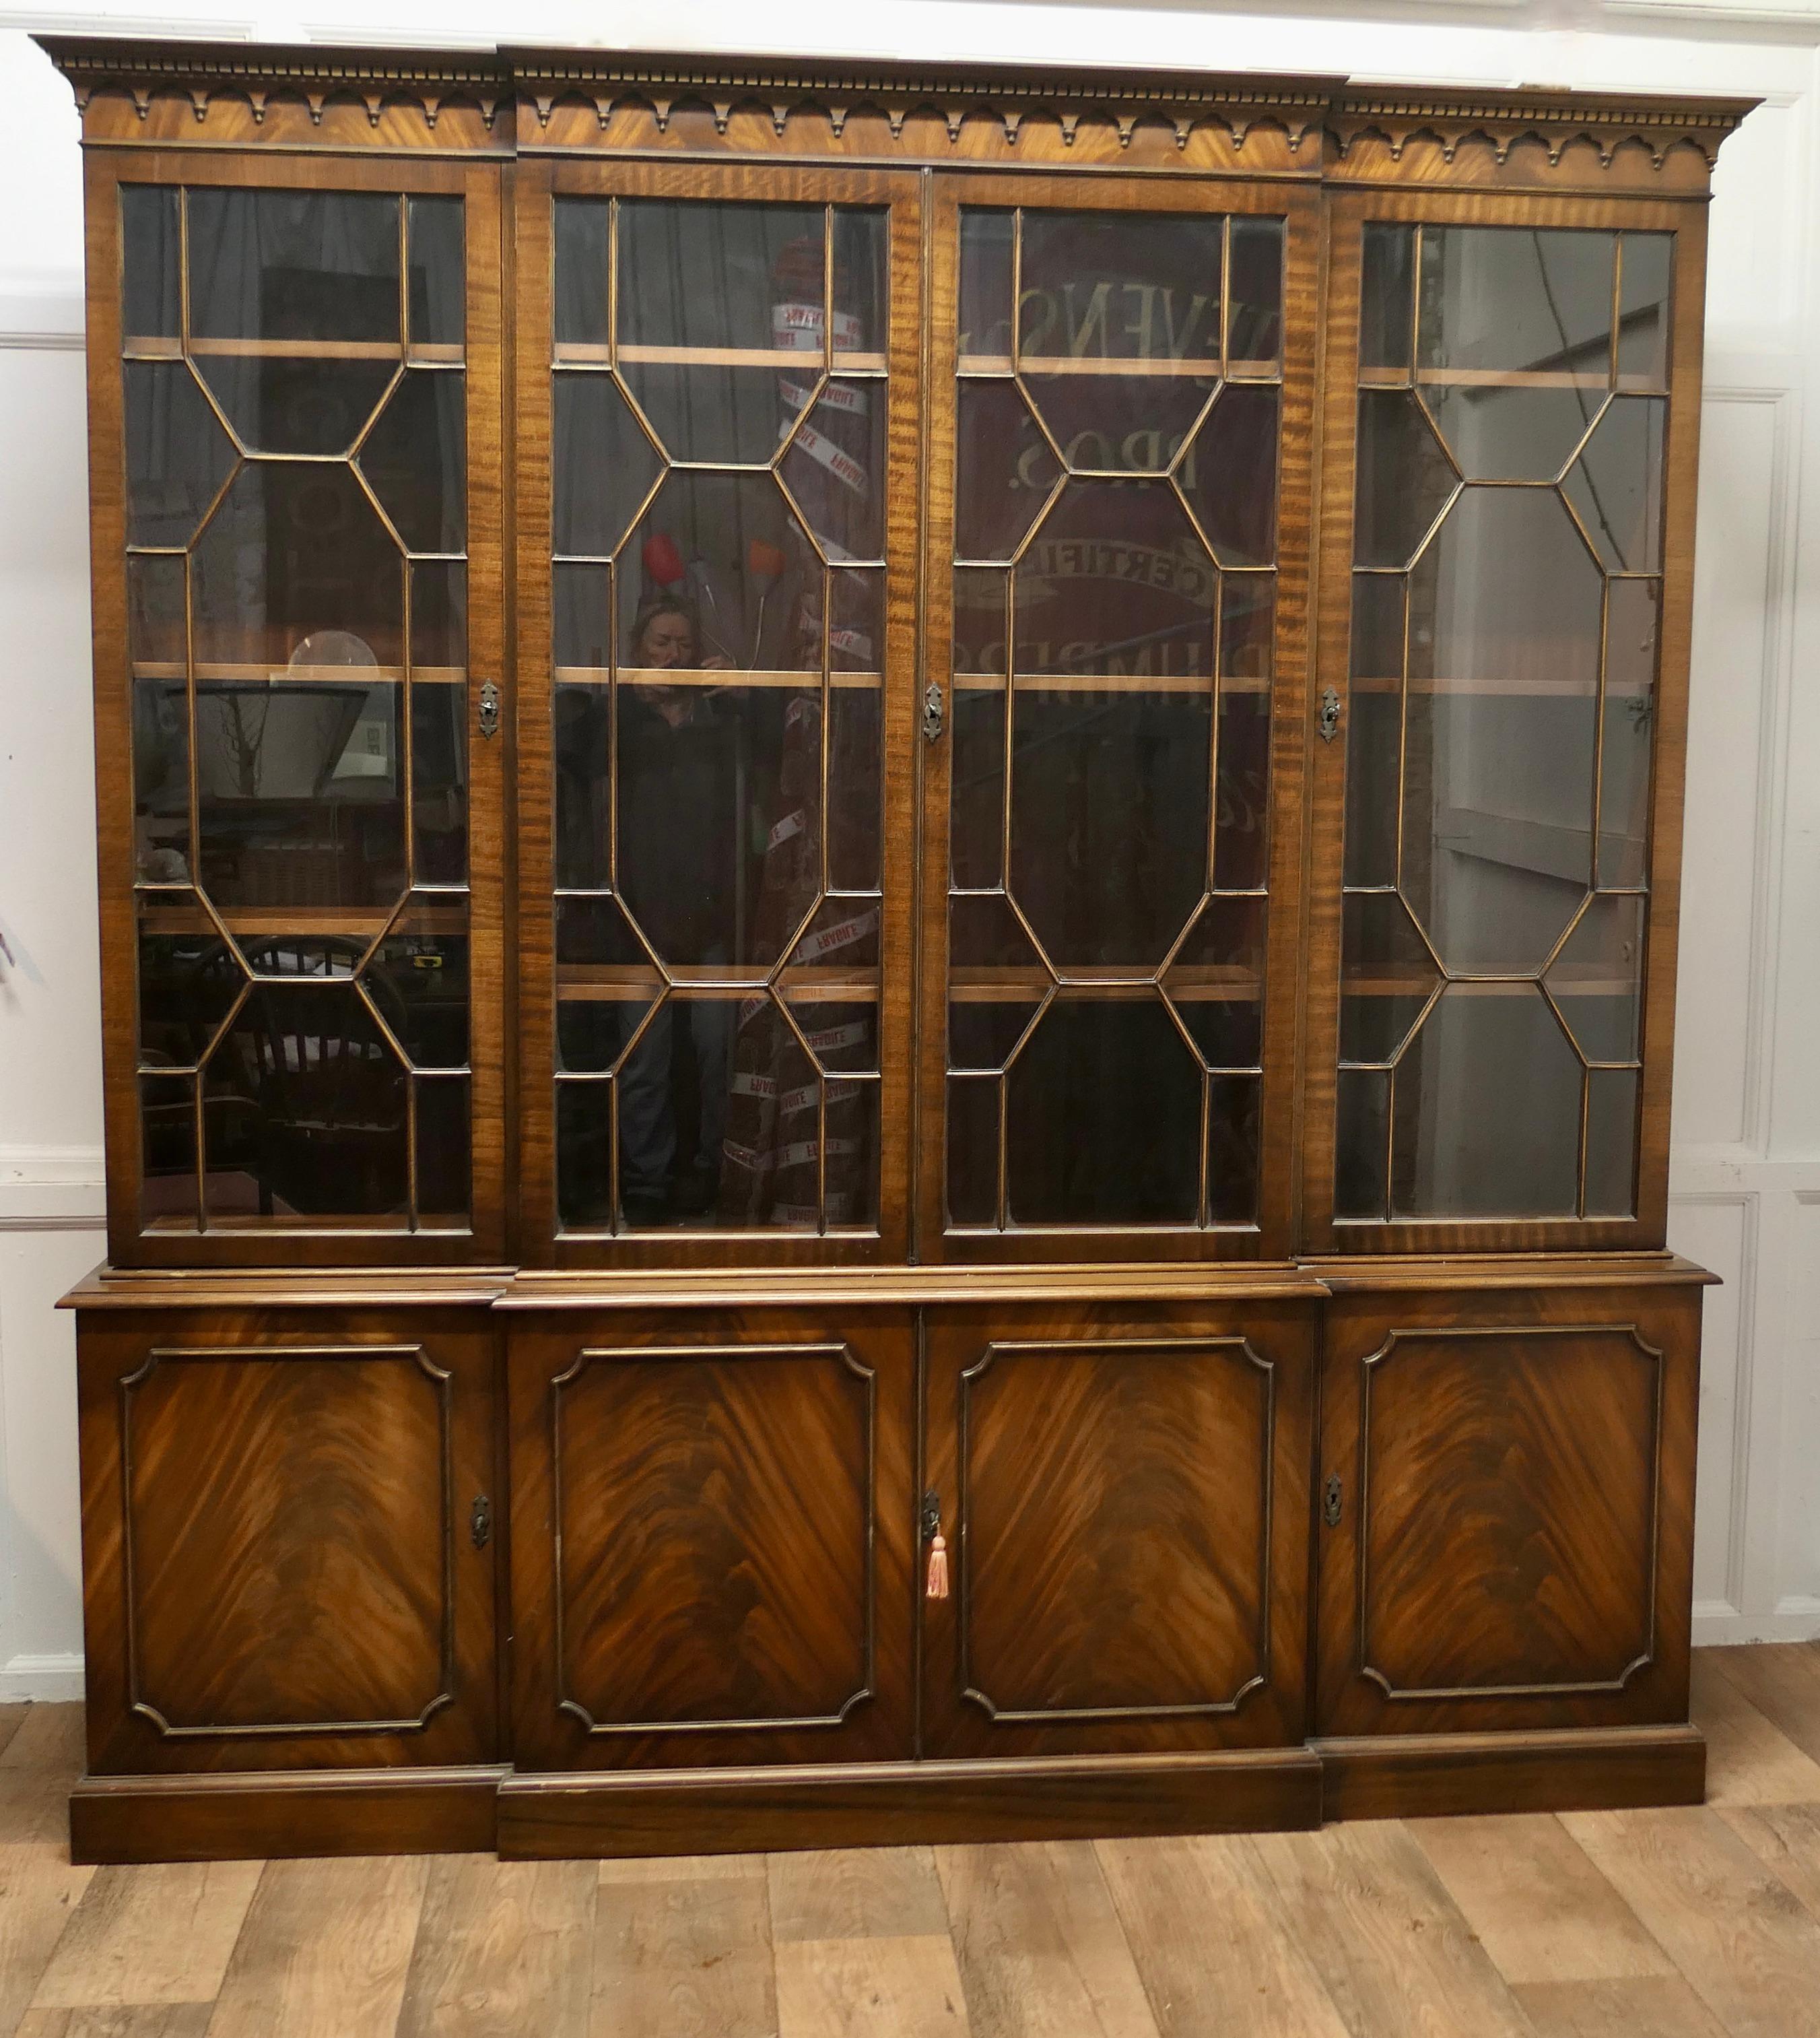 A Large Reprodux Break Front Bookcase  by Bevan Funnell

An excellent looking piece with a decorative cornice, it has four glazed doors to the top and 4 panelled doors below

The top Section of the bookcase has 4 Astral Glazed Doors, enclosing